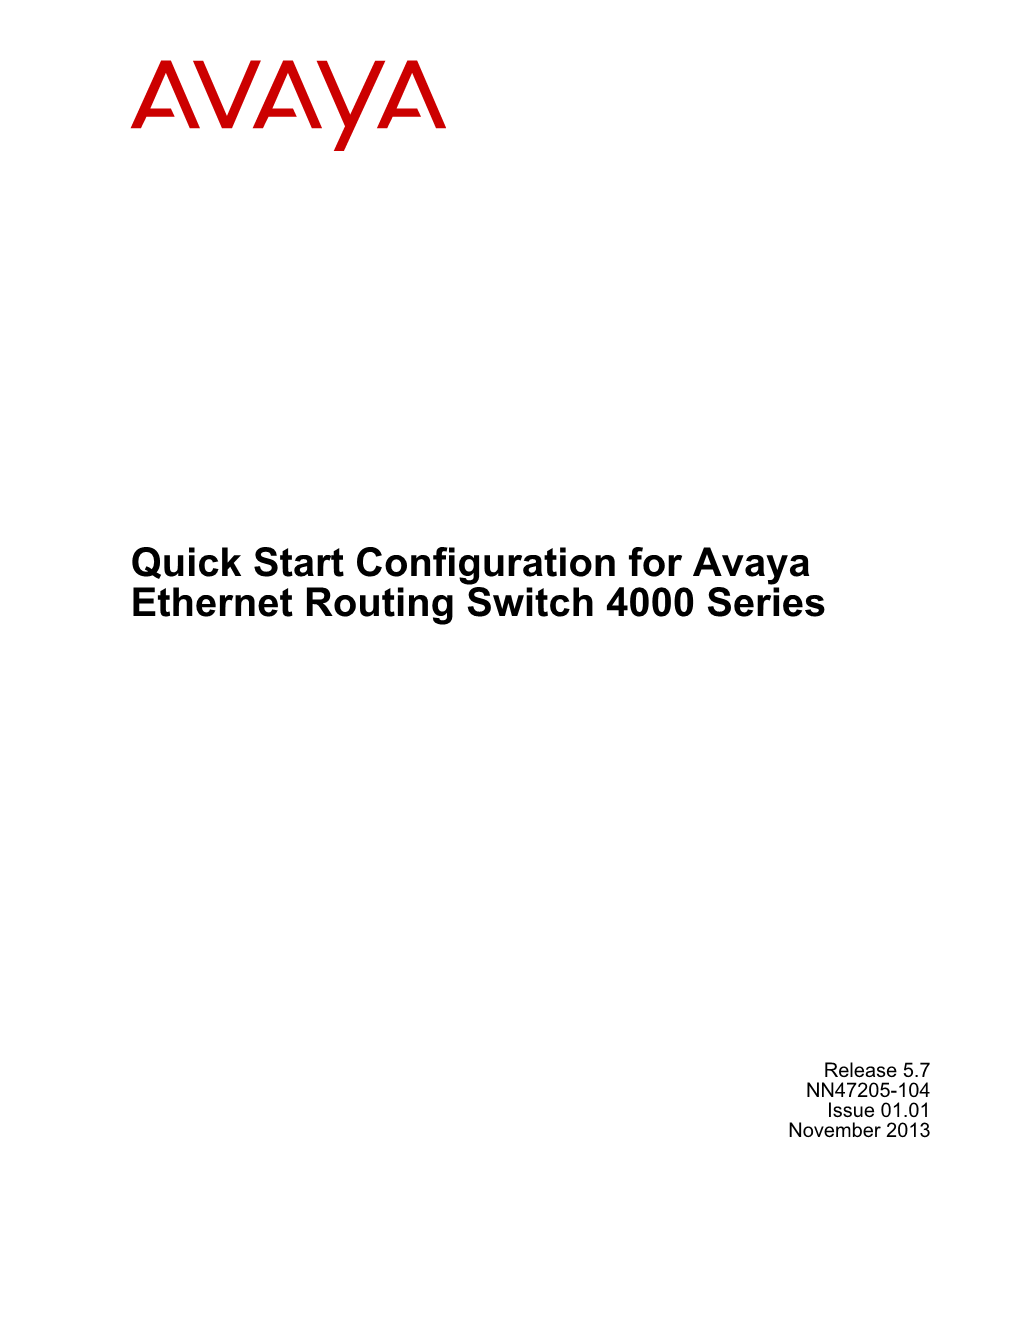 Quick Start Configuration for Avaya Ethernet Routing Switch 4000 Series